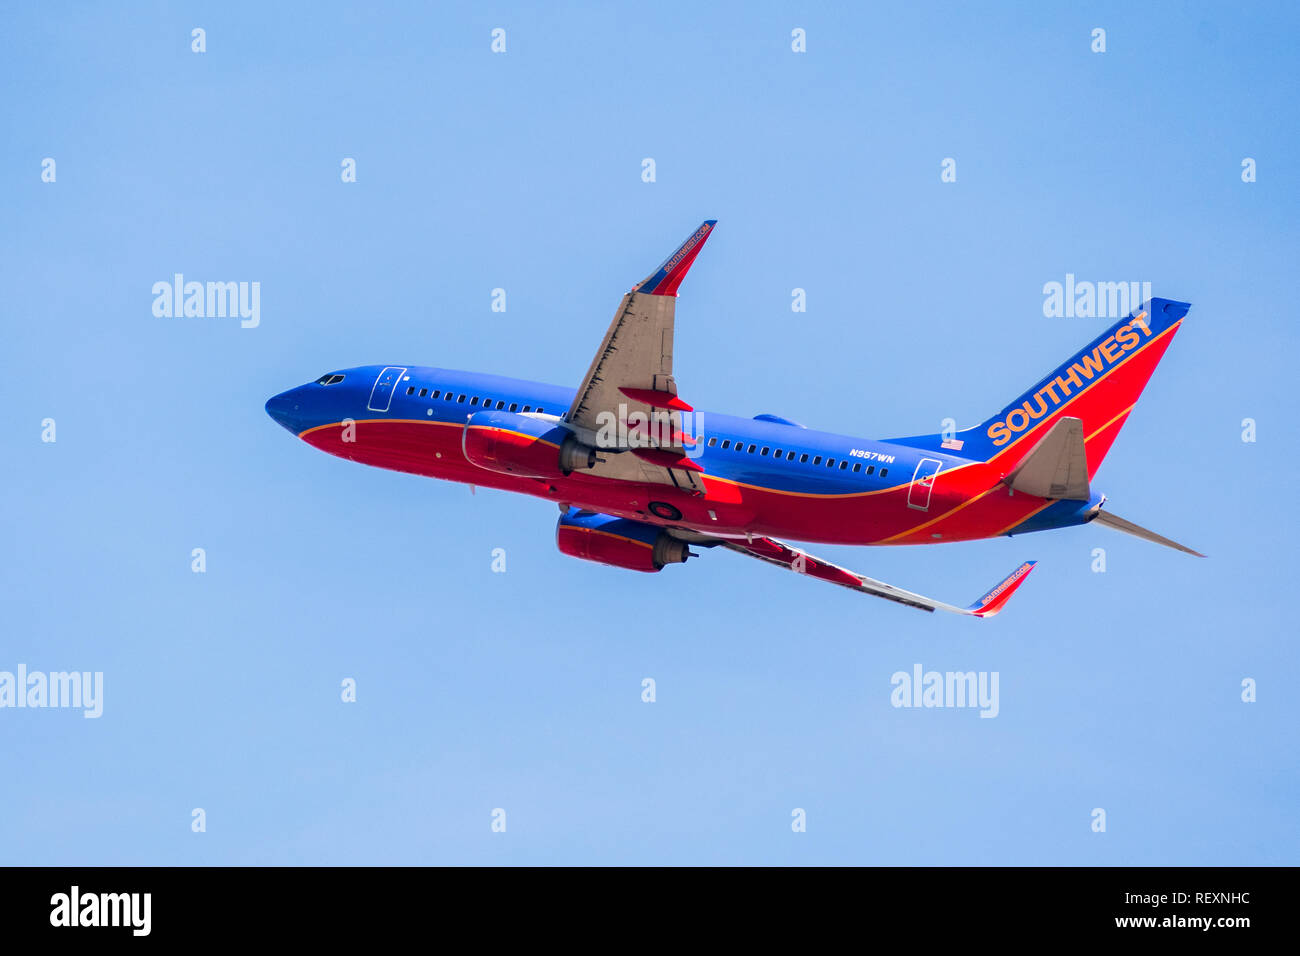 January 31, 2018 San Jose / CA / USA - Southwest Airlines aircraft up in the air after taking off from Norman Y. Mineta San Jose International Airport Stock Photo